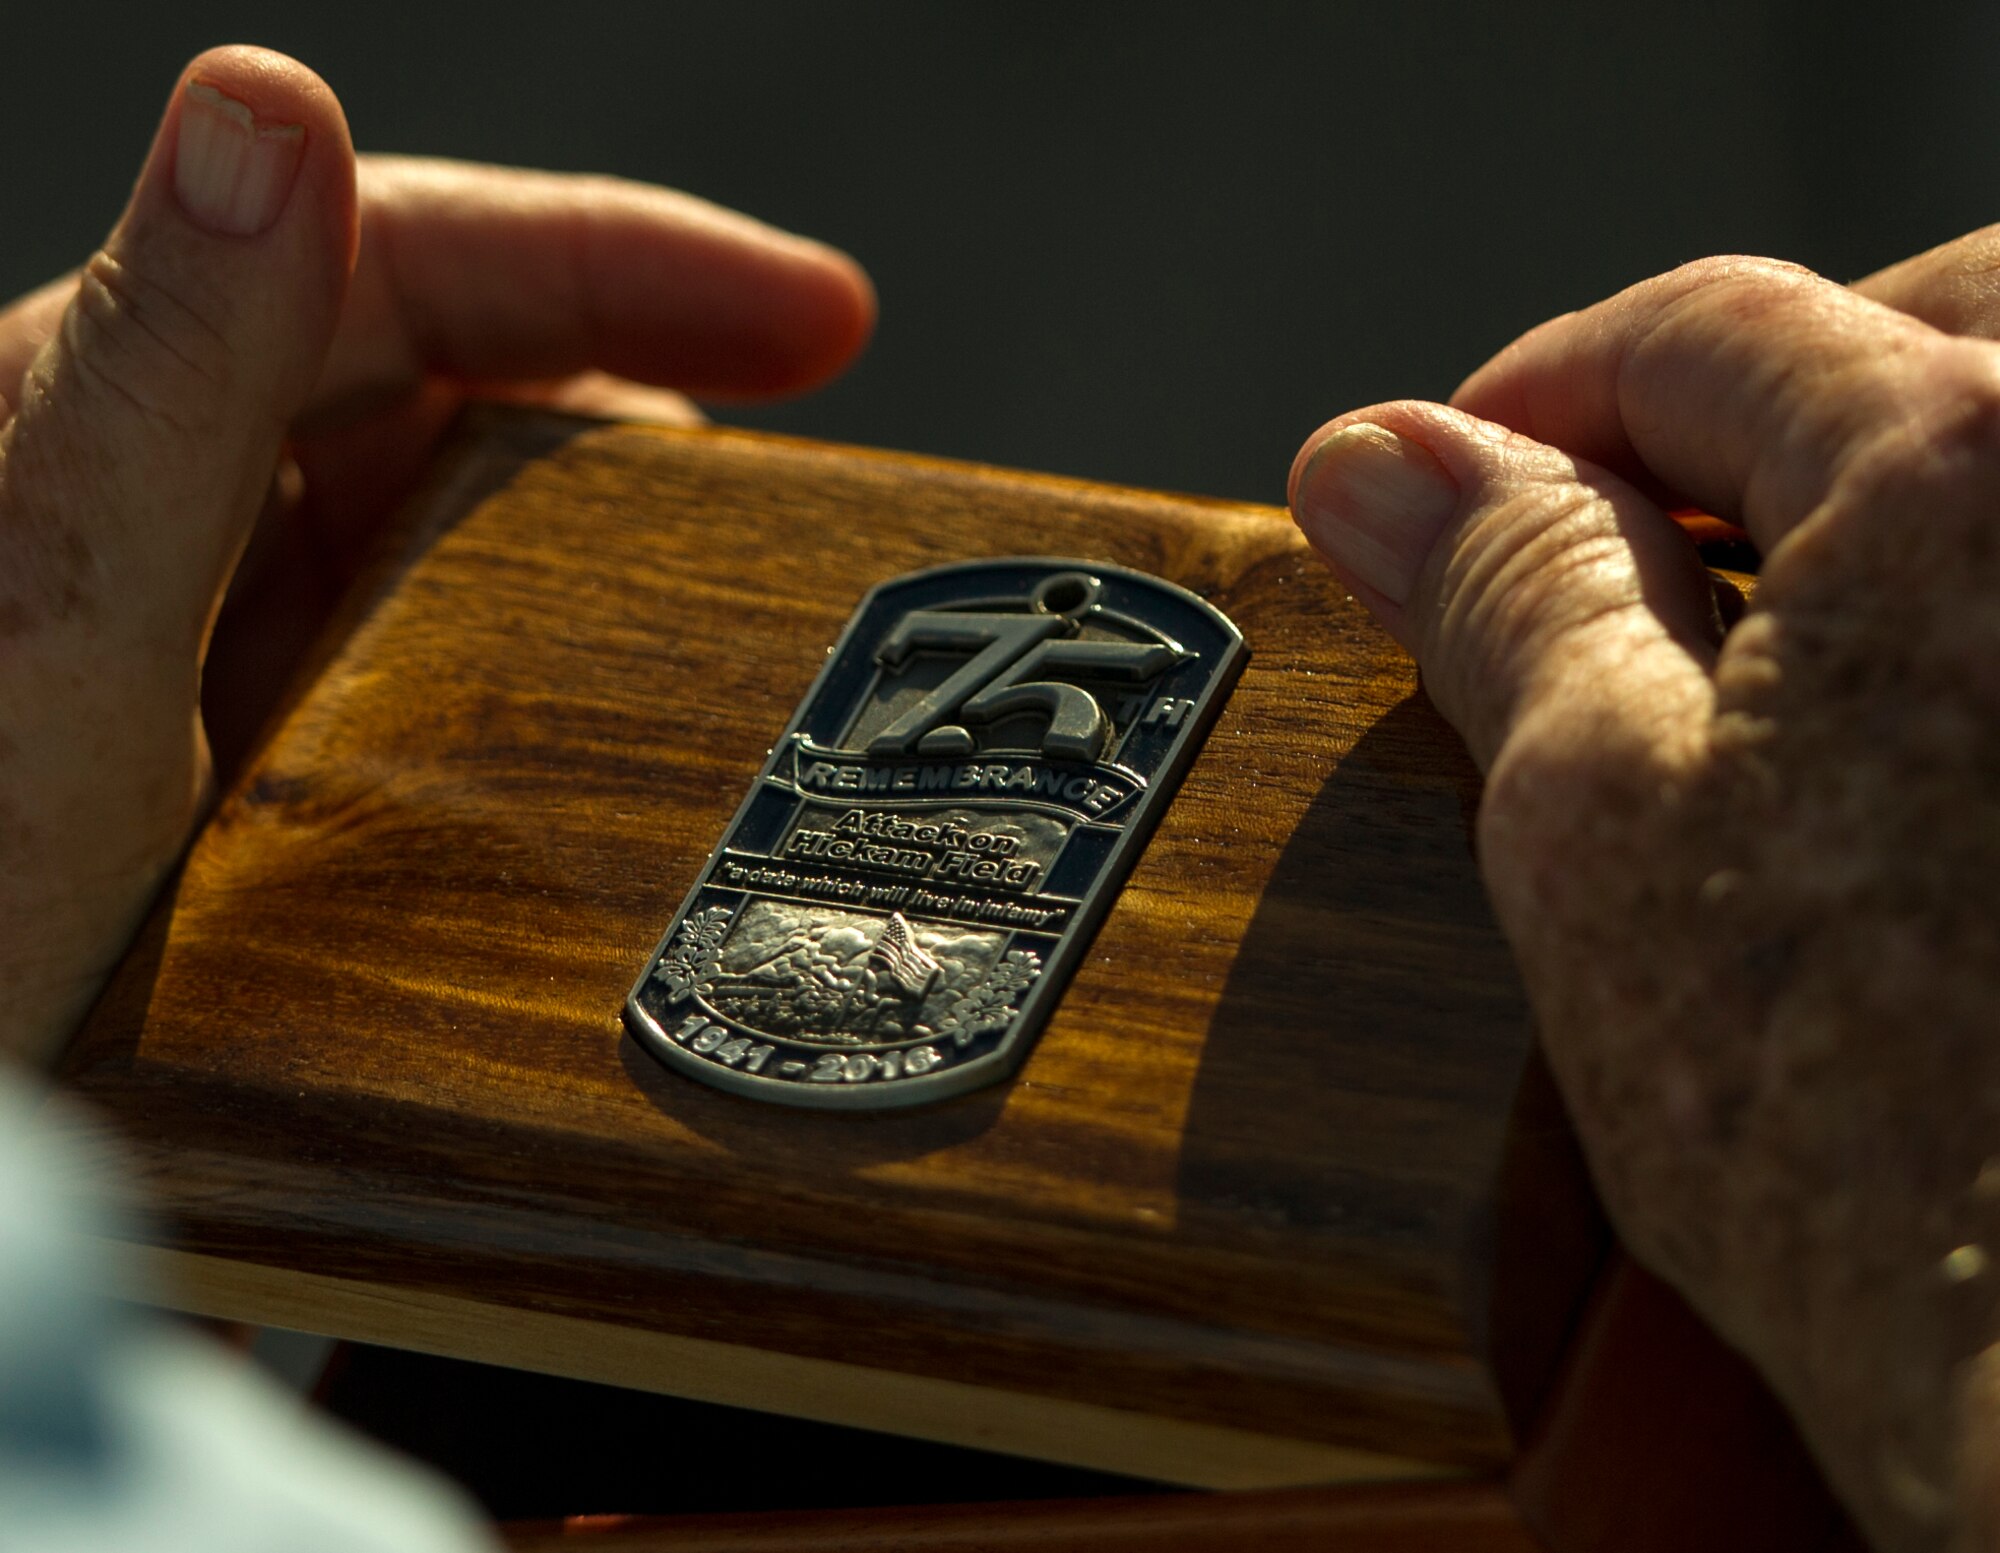 U.S. Army Private Edward Bloch, a survivor of the attack on Hickam Field, holds a wooden box given to him during the 75th Commemoration of the Dec. 7, 1941 attack on Hickam Field ceremony Dec. 7, 2016, at Joint Base Pearl Harbor-Hickam, Hawaii. Bloch was a switchboard operator in the control tower assigned to the 5th Bomb Group at Hickam Field. During the attack, he made eye contact with a Japanese aircraft gunner and recalls the Star Spangled Banner being played over the public announcement system between the two waves of attacks. After the attack, Bloch served in the South Pacific Flying Combat crew in the B-17 Flying Fortress and B-24 Liberator Bombers. (U.S. Air Force photo by Tech. Sgt. Nathan Allen)